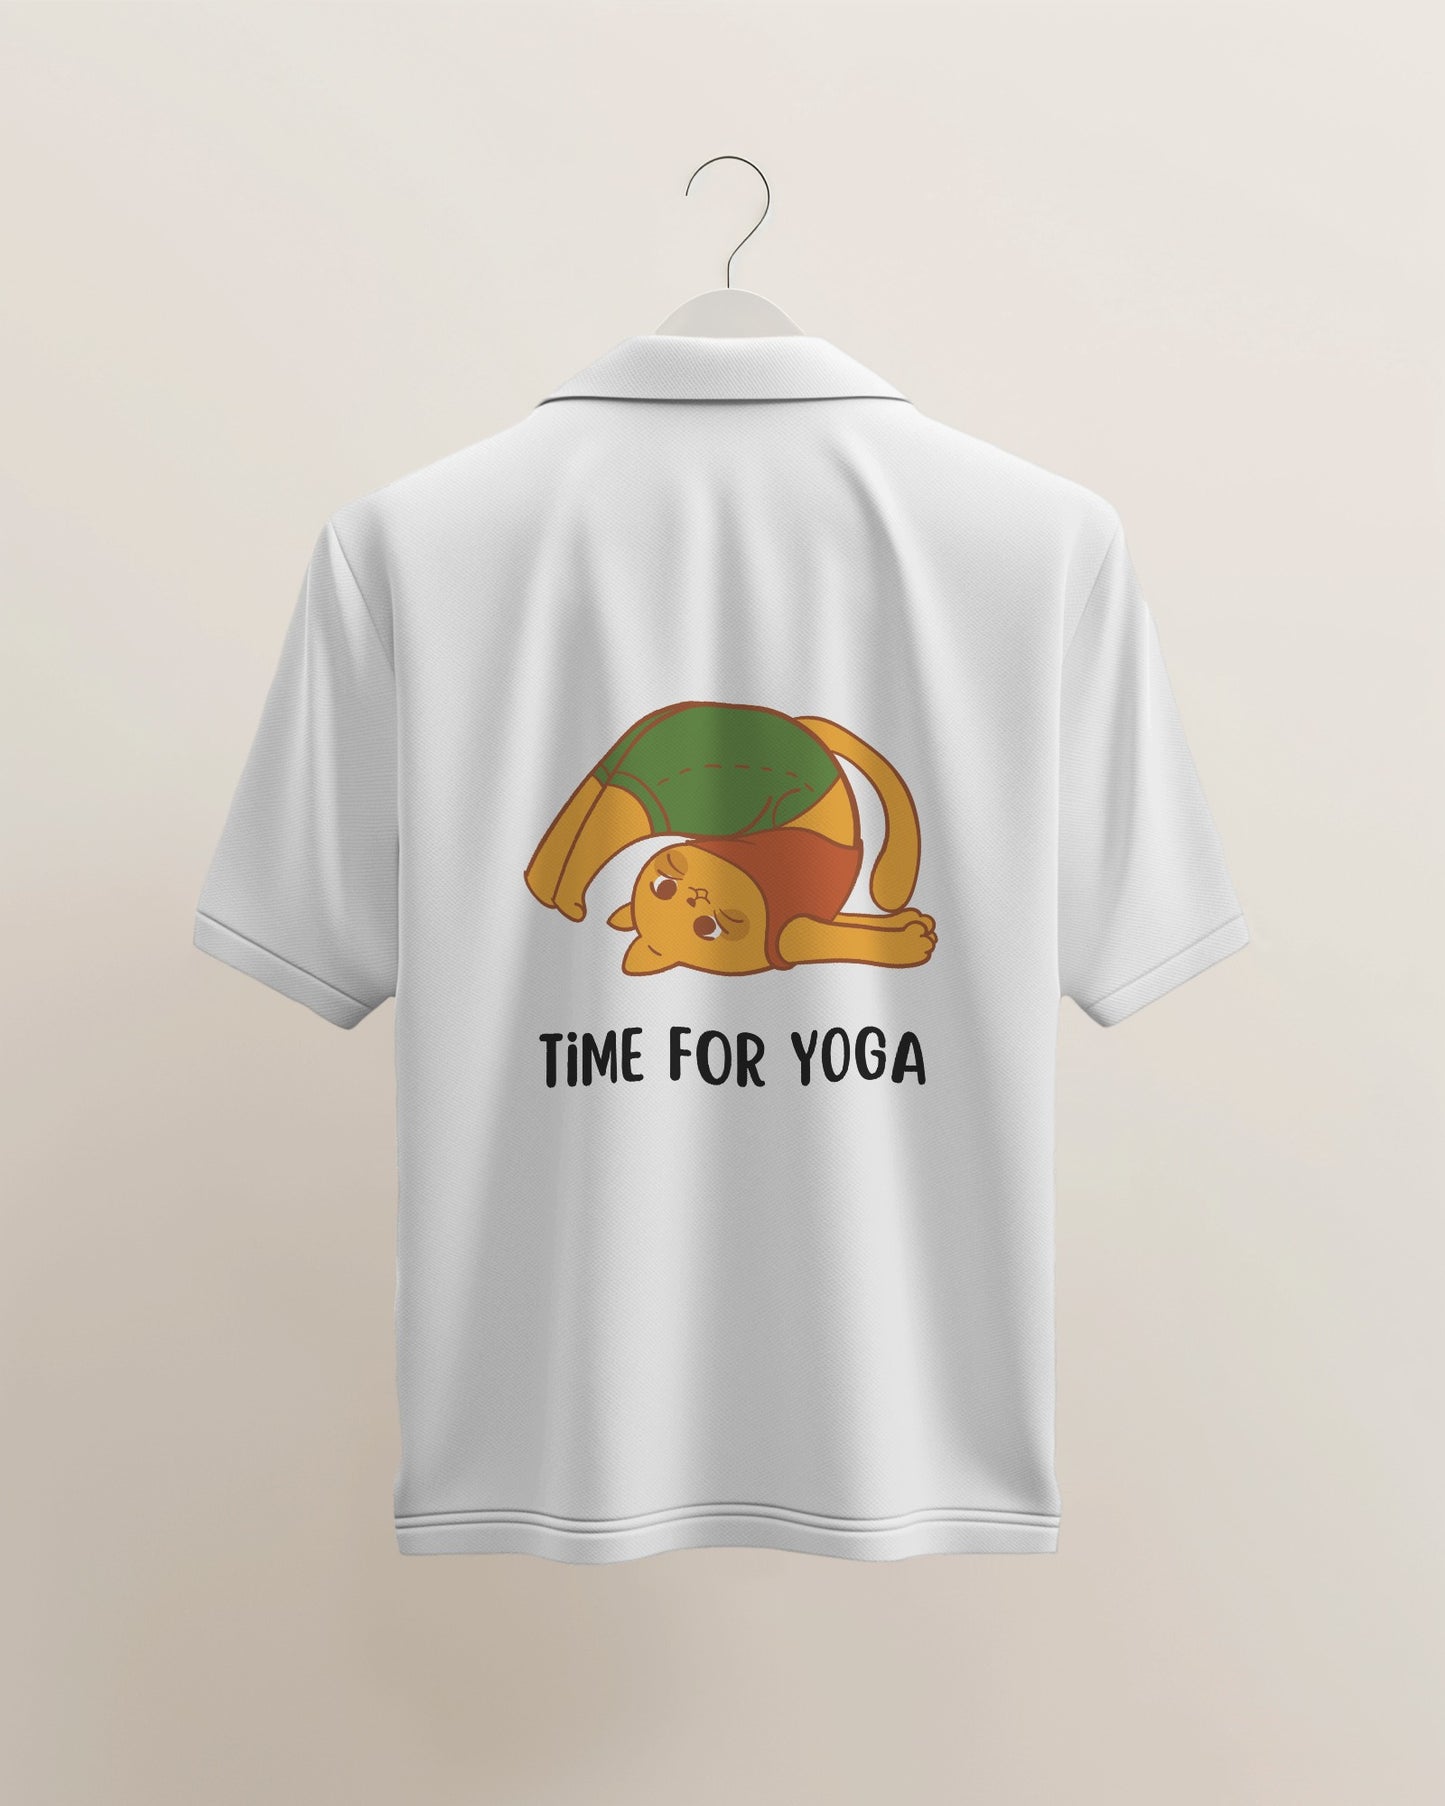 Time for Yoga T-Shirts for Women